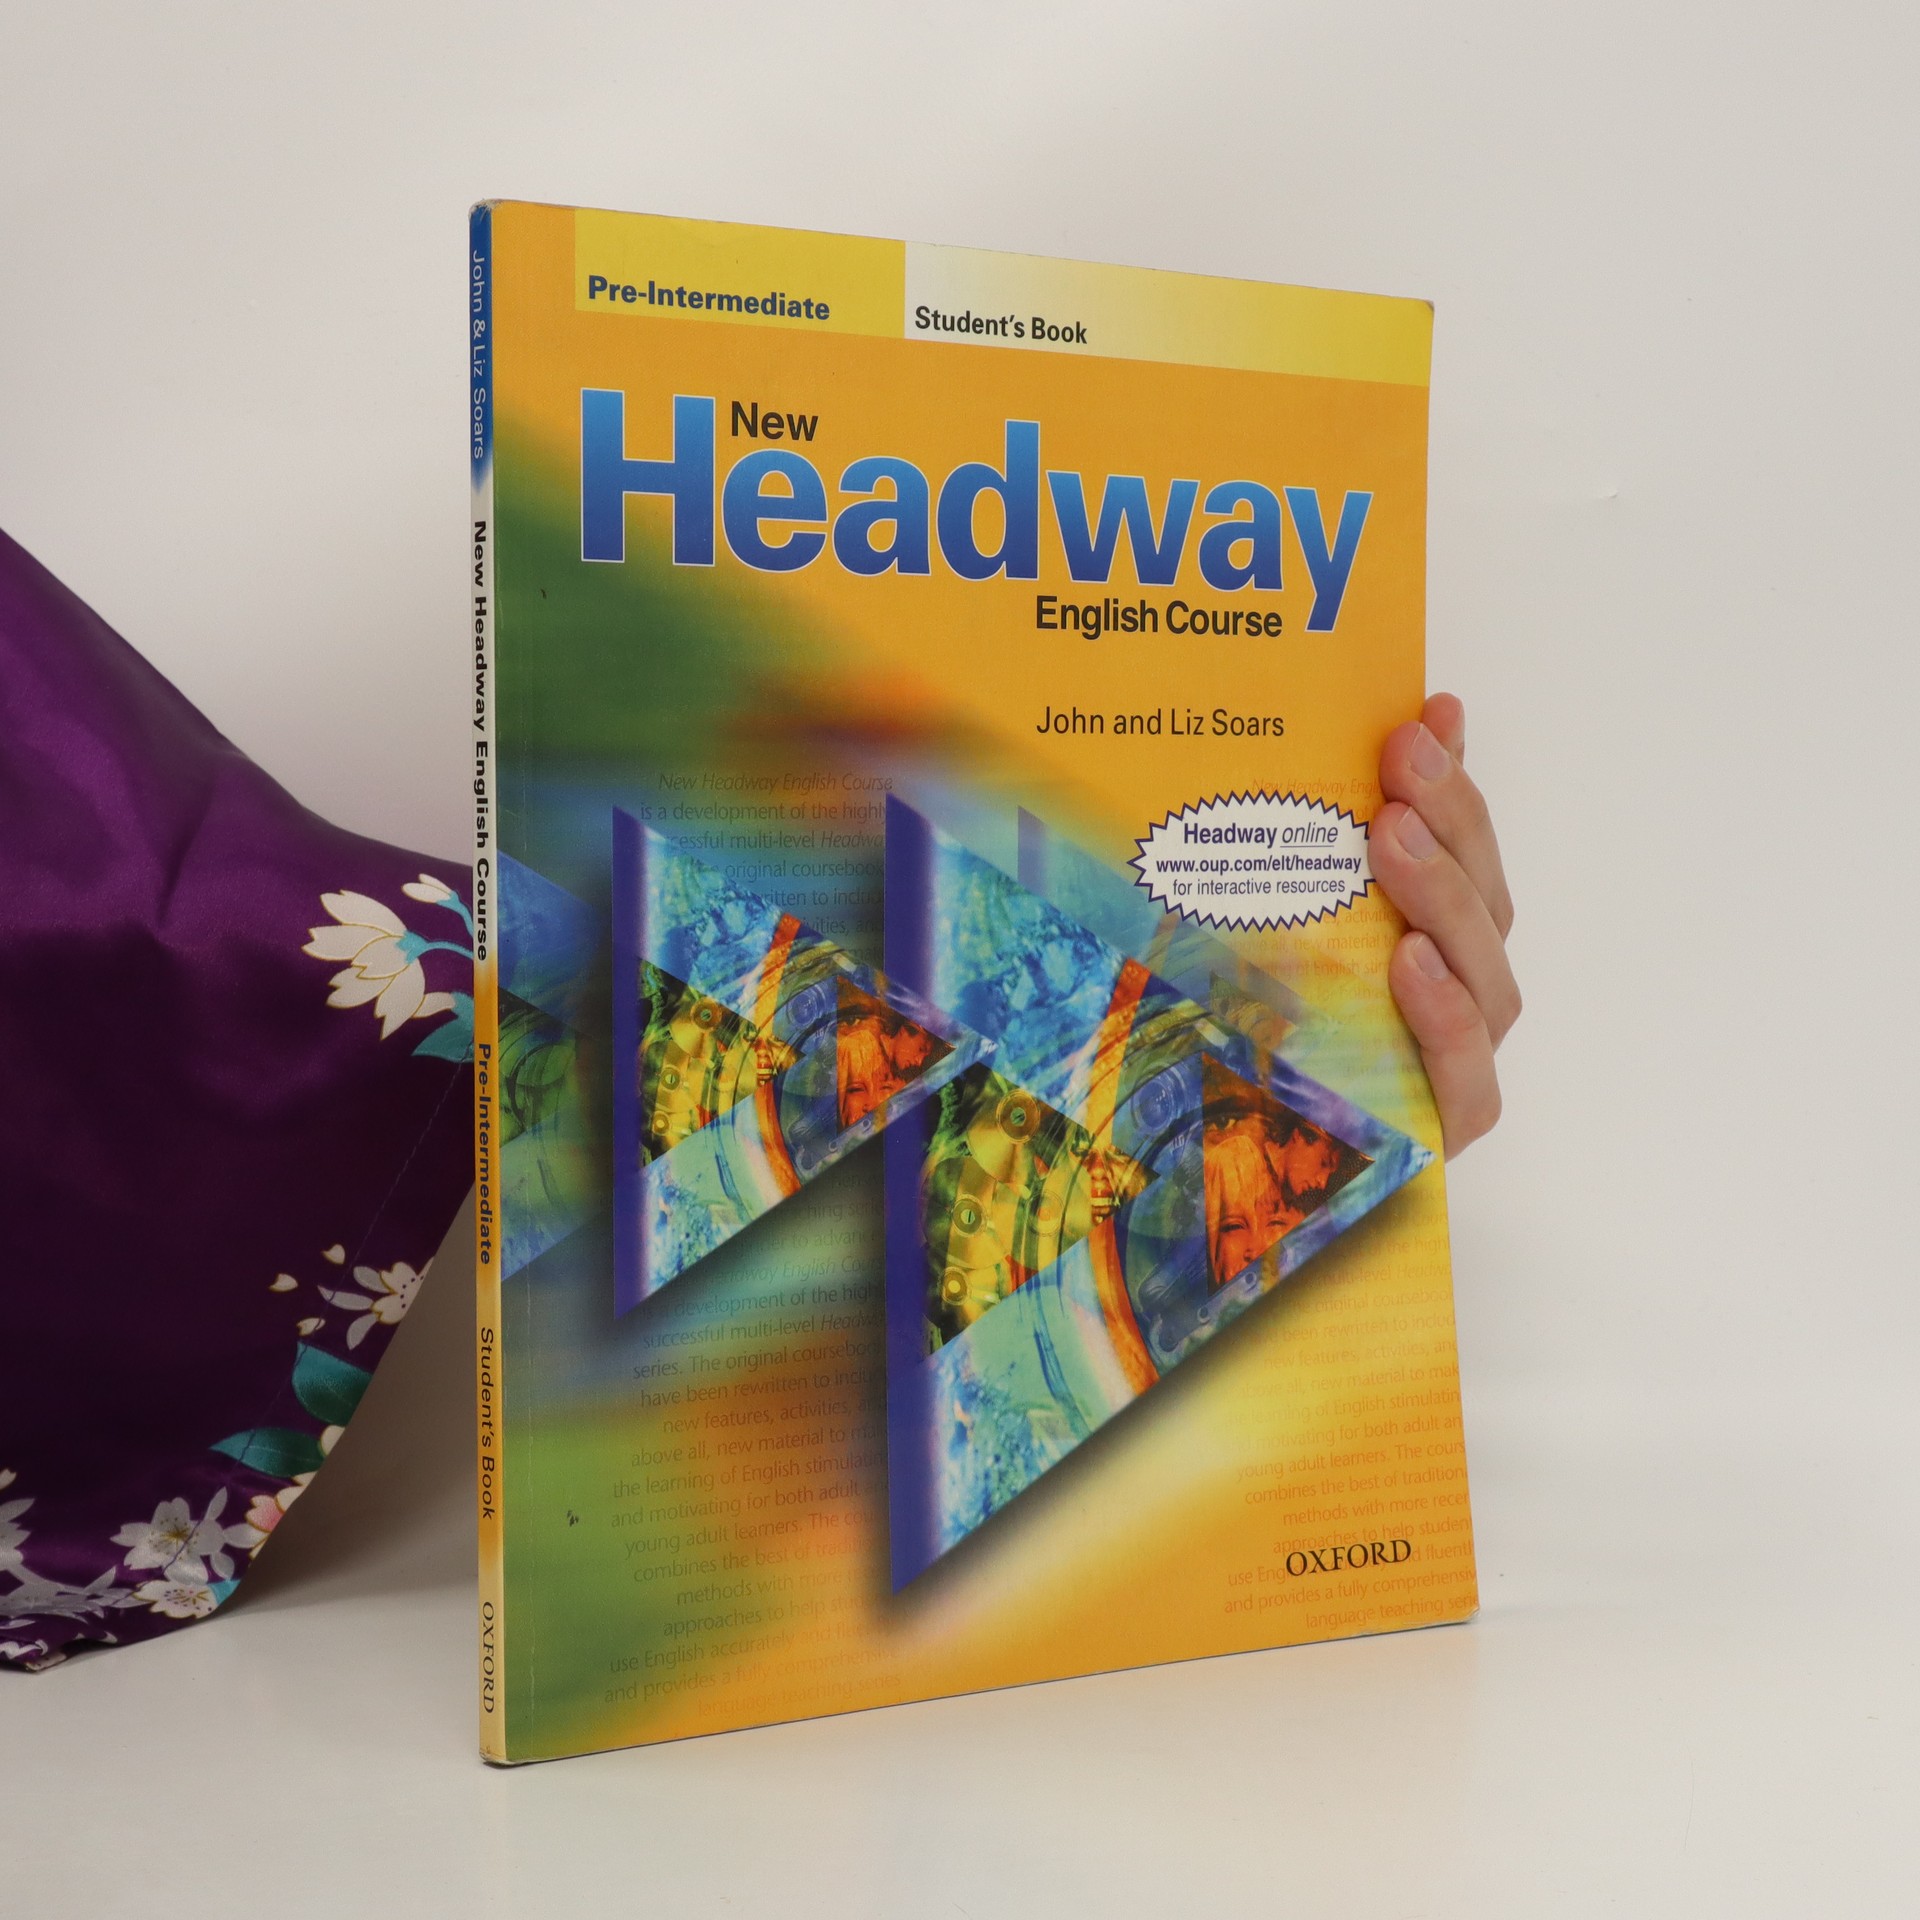 New headway student s book. Headway pre-Intermediate student's book. Headway books. Pioneer pre Intermediate students book. Intermediate student's book 2h.